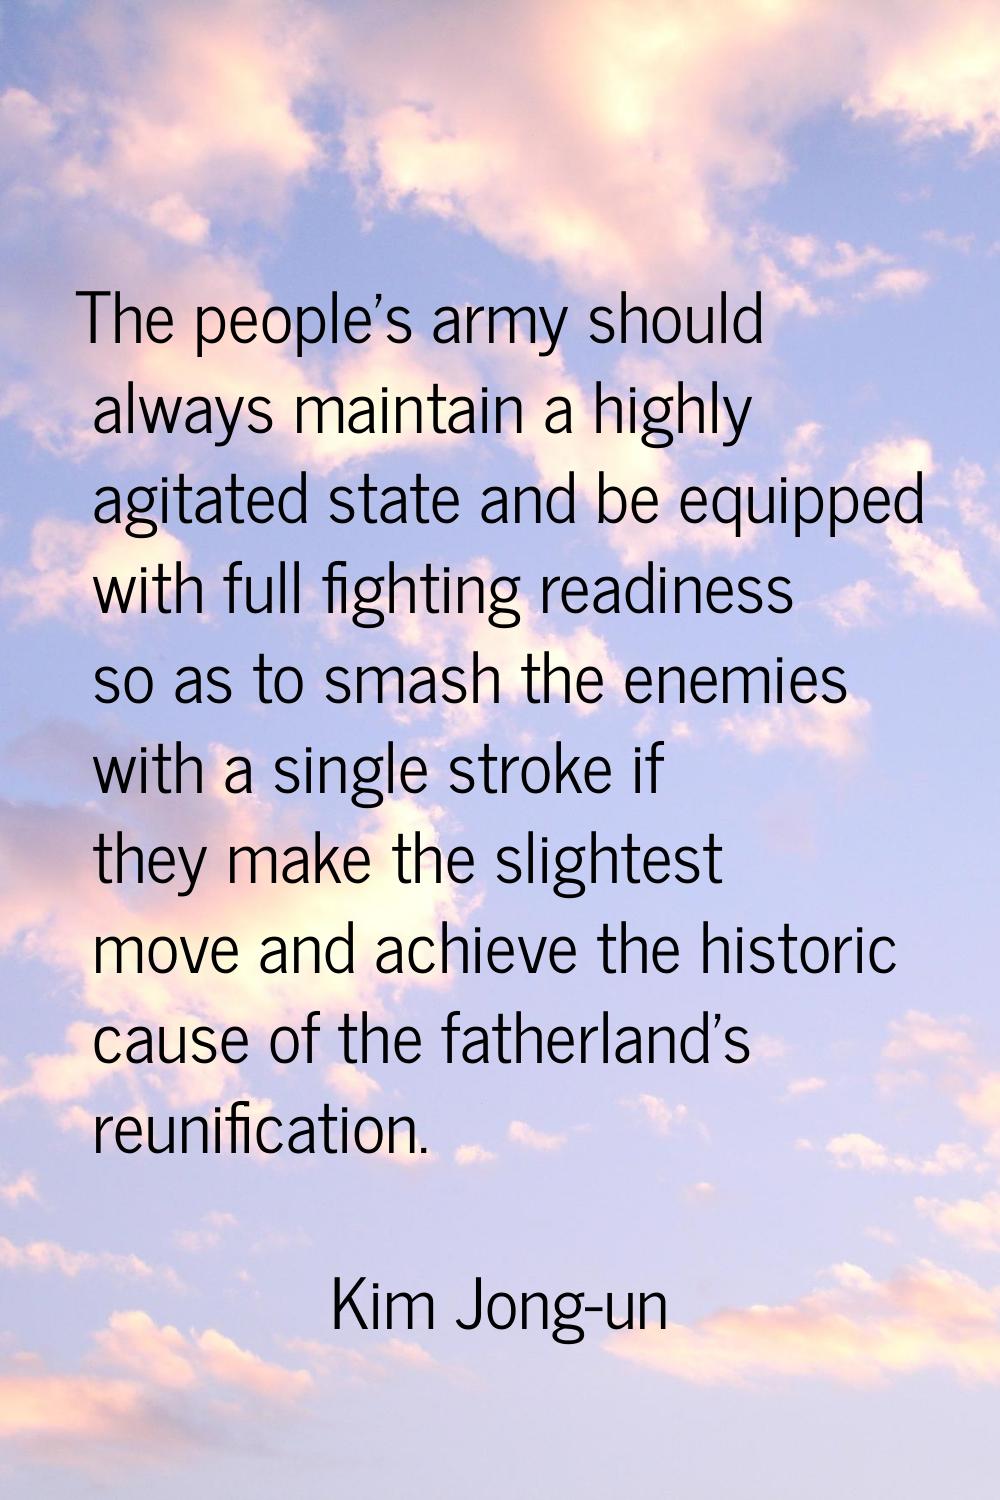 The people's army should always maintain a highly agitated state and be equipped with full fighting